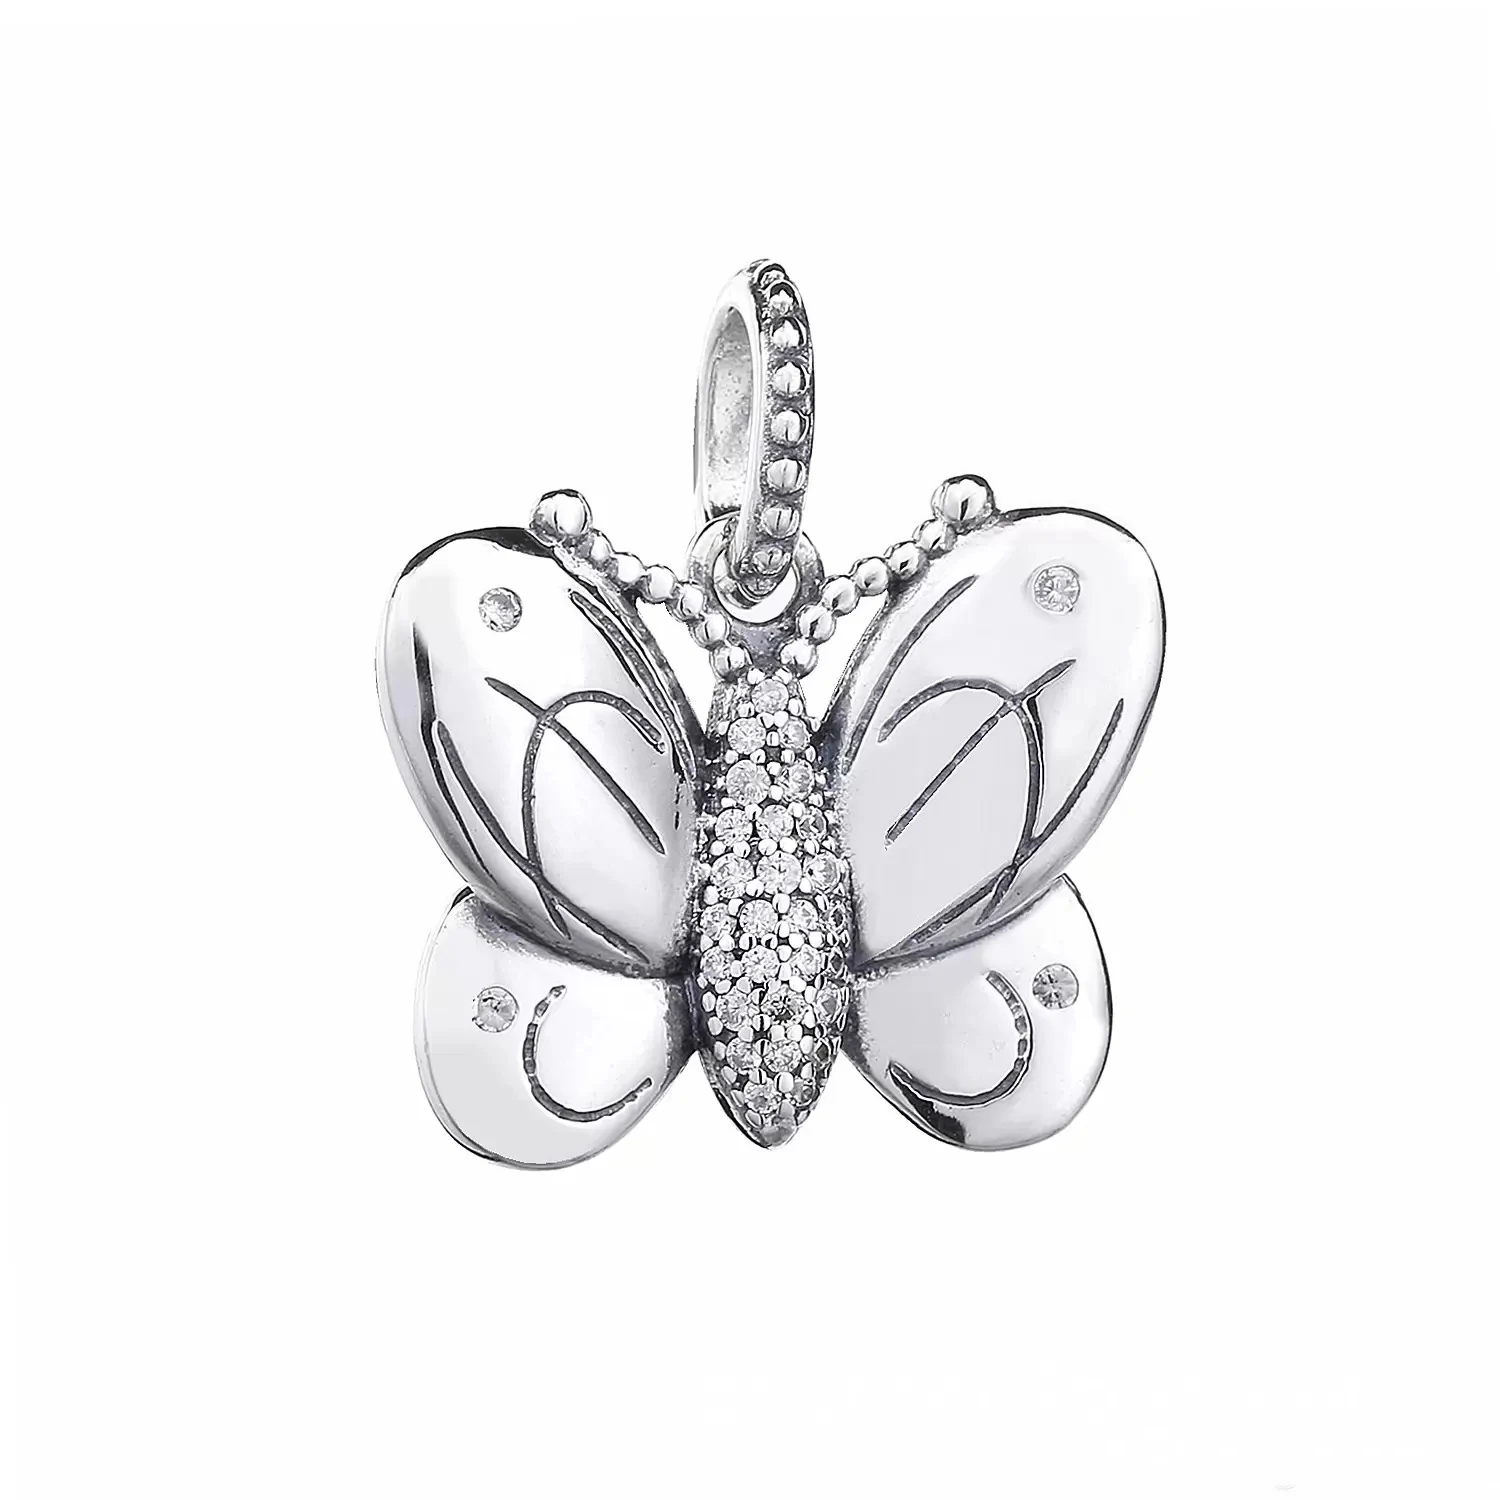 

2022 Spring New 925 Sterling Silver Sparking Butterfly Pendant Charm Bead Fits European Jewelry Charm Bracelets